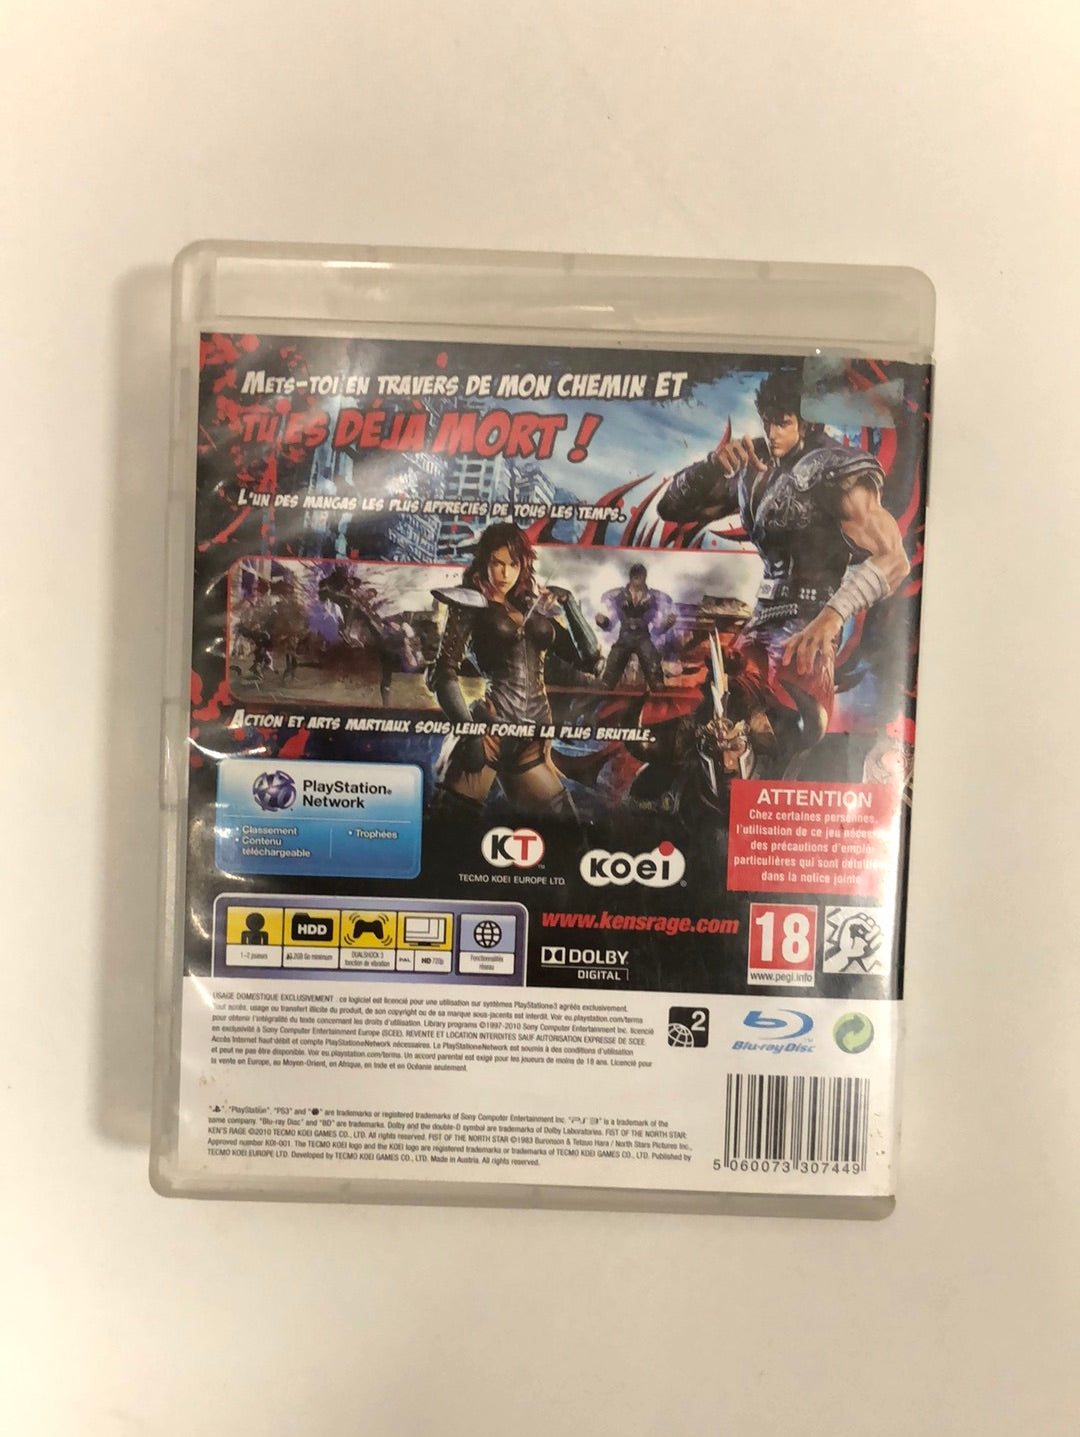 Fist of the north star ken’s rage Sony PS3 avec notice